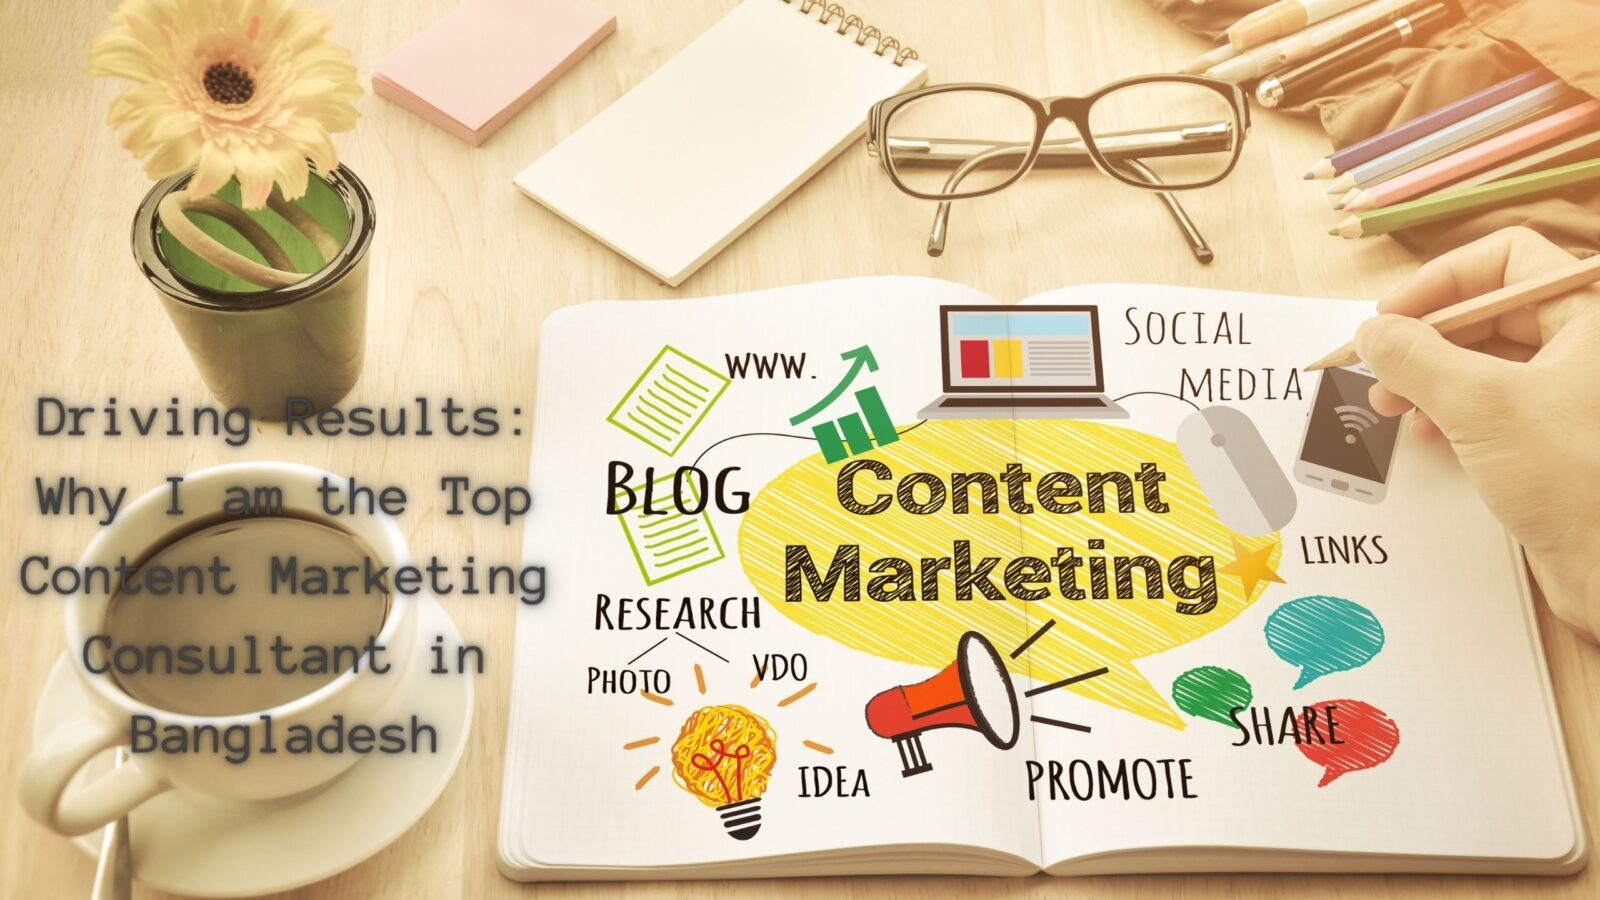 Driving Results: Why I am the Top Content Marketing Consultant in Bangladesh